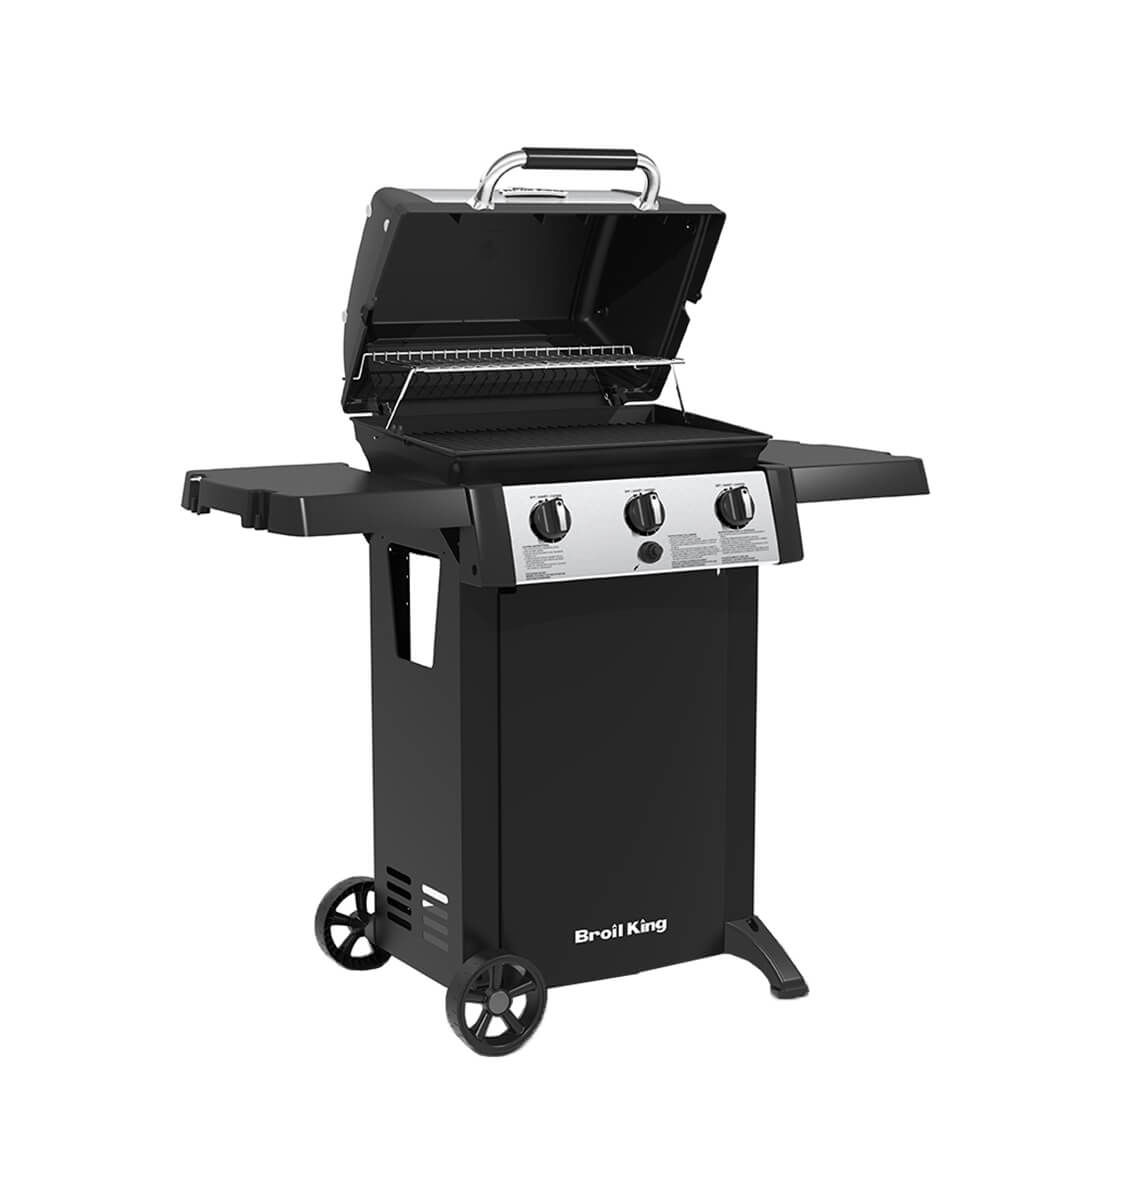 Image of Broil King Gem 310 Grill bei nettoshop.ch